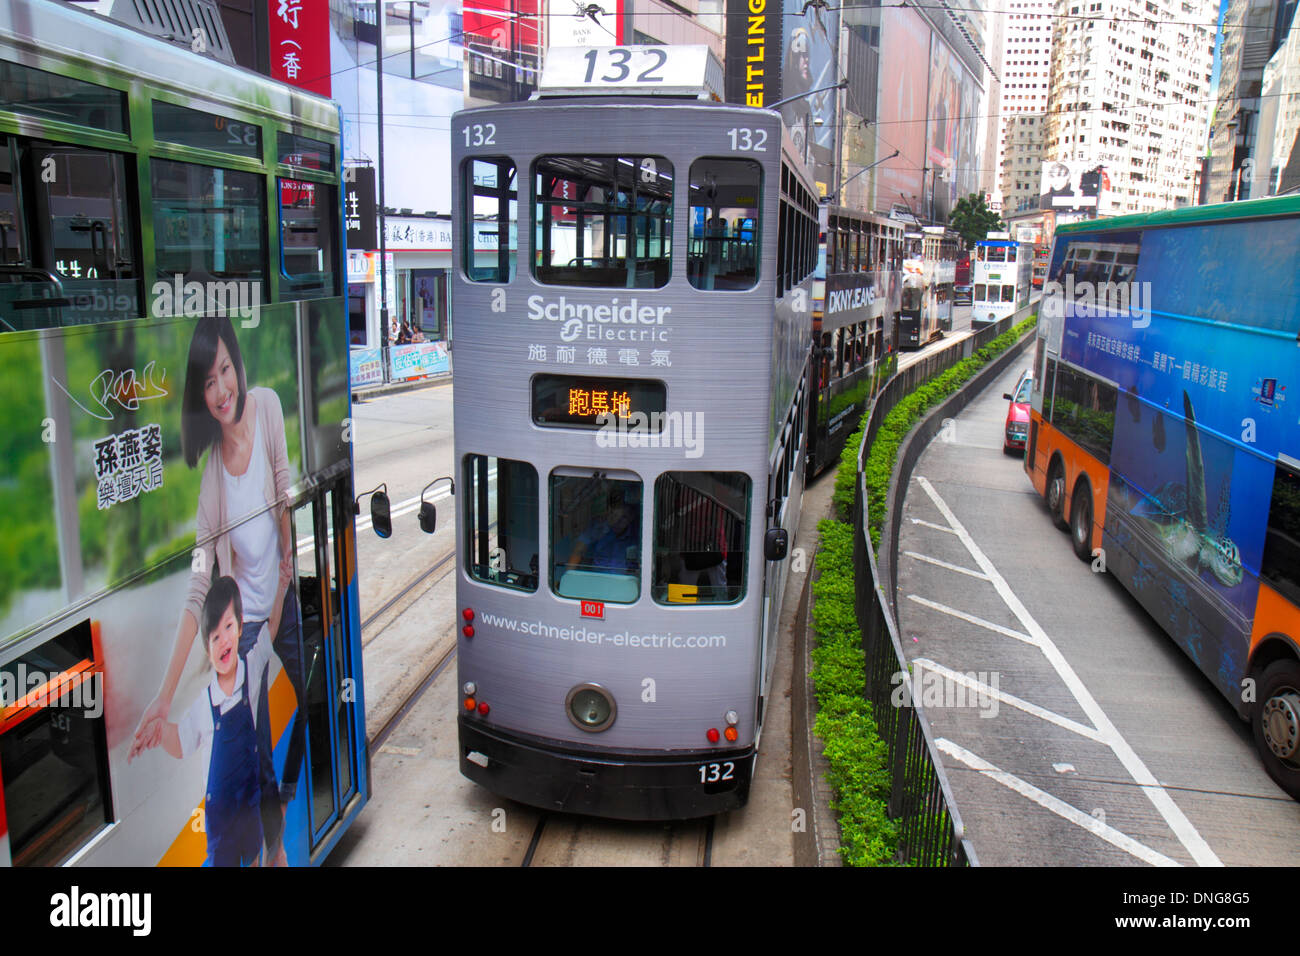 Hong Kong China,HK,Asia,Chinese,Oriental,Island,Causeway Bay,Yee Wo Street,double decker tram Tramways,businesses,district,buildings,city skyline,Cant Stock Photo